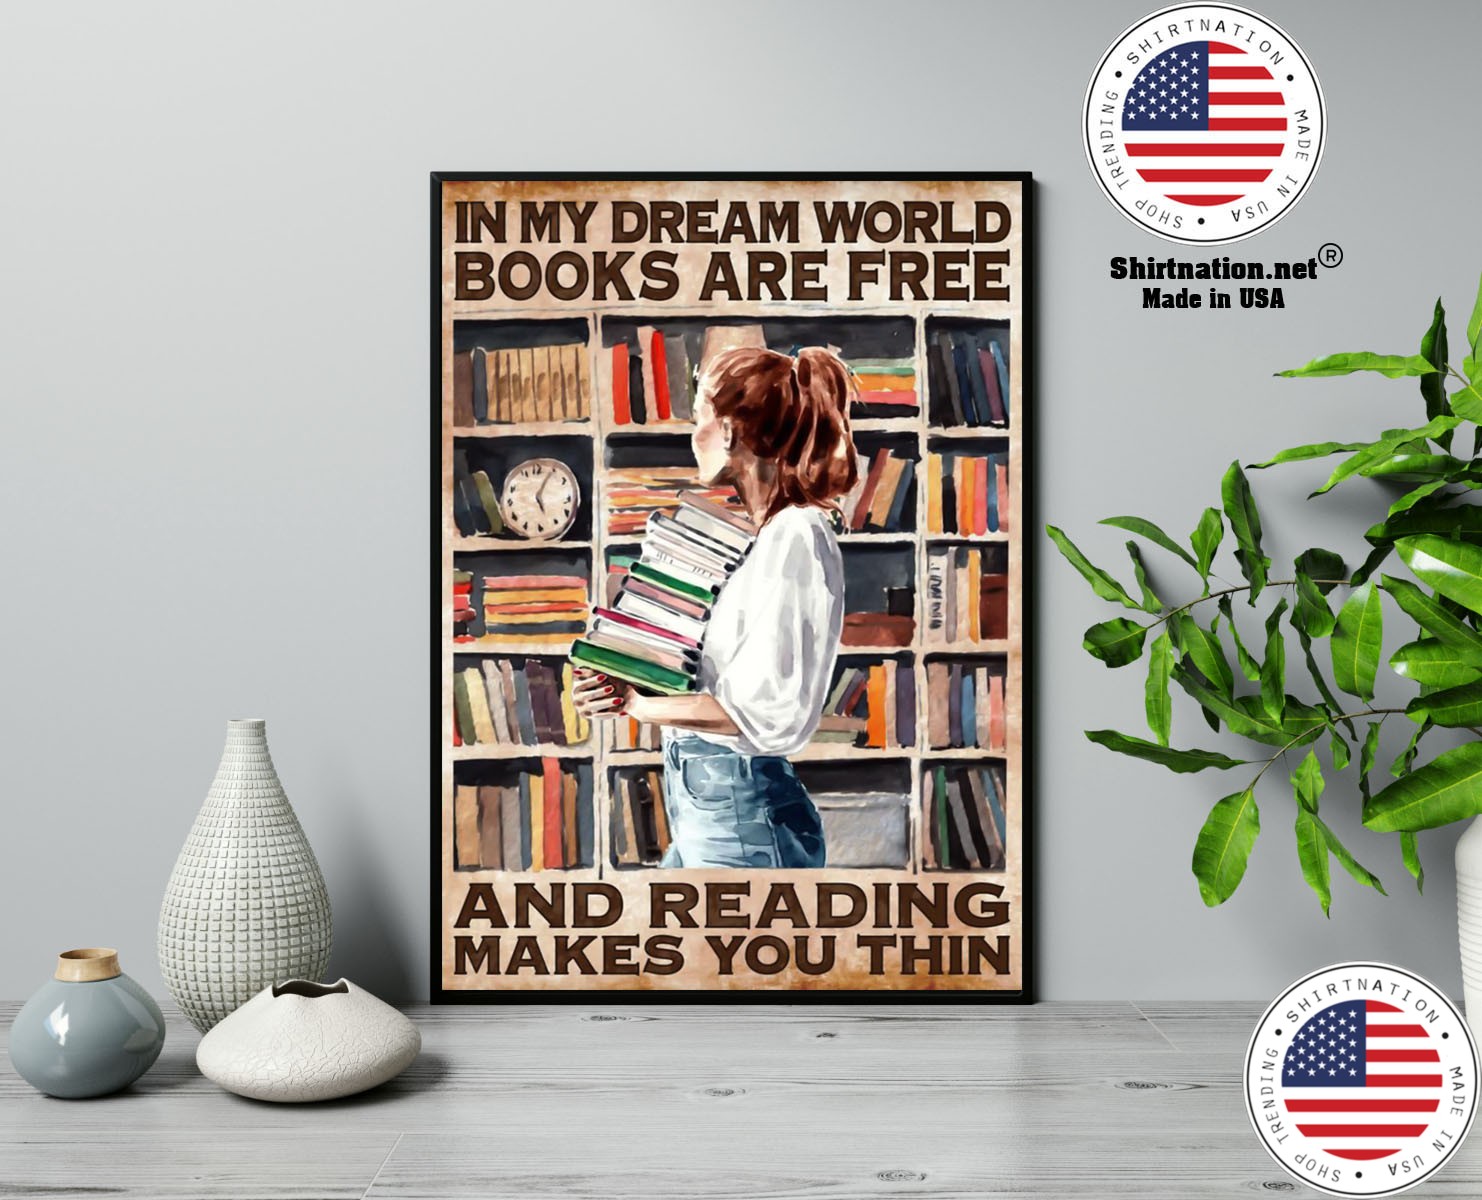 In my dreams world books are free and reading makes you thin poster 13